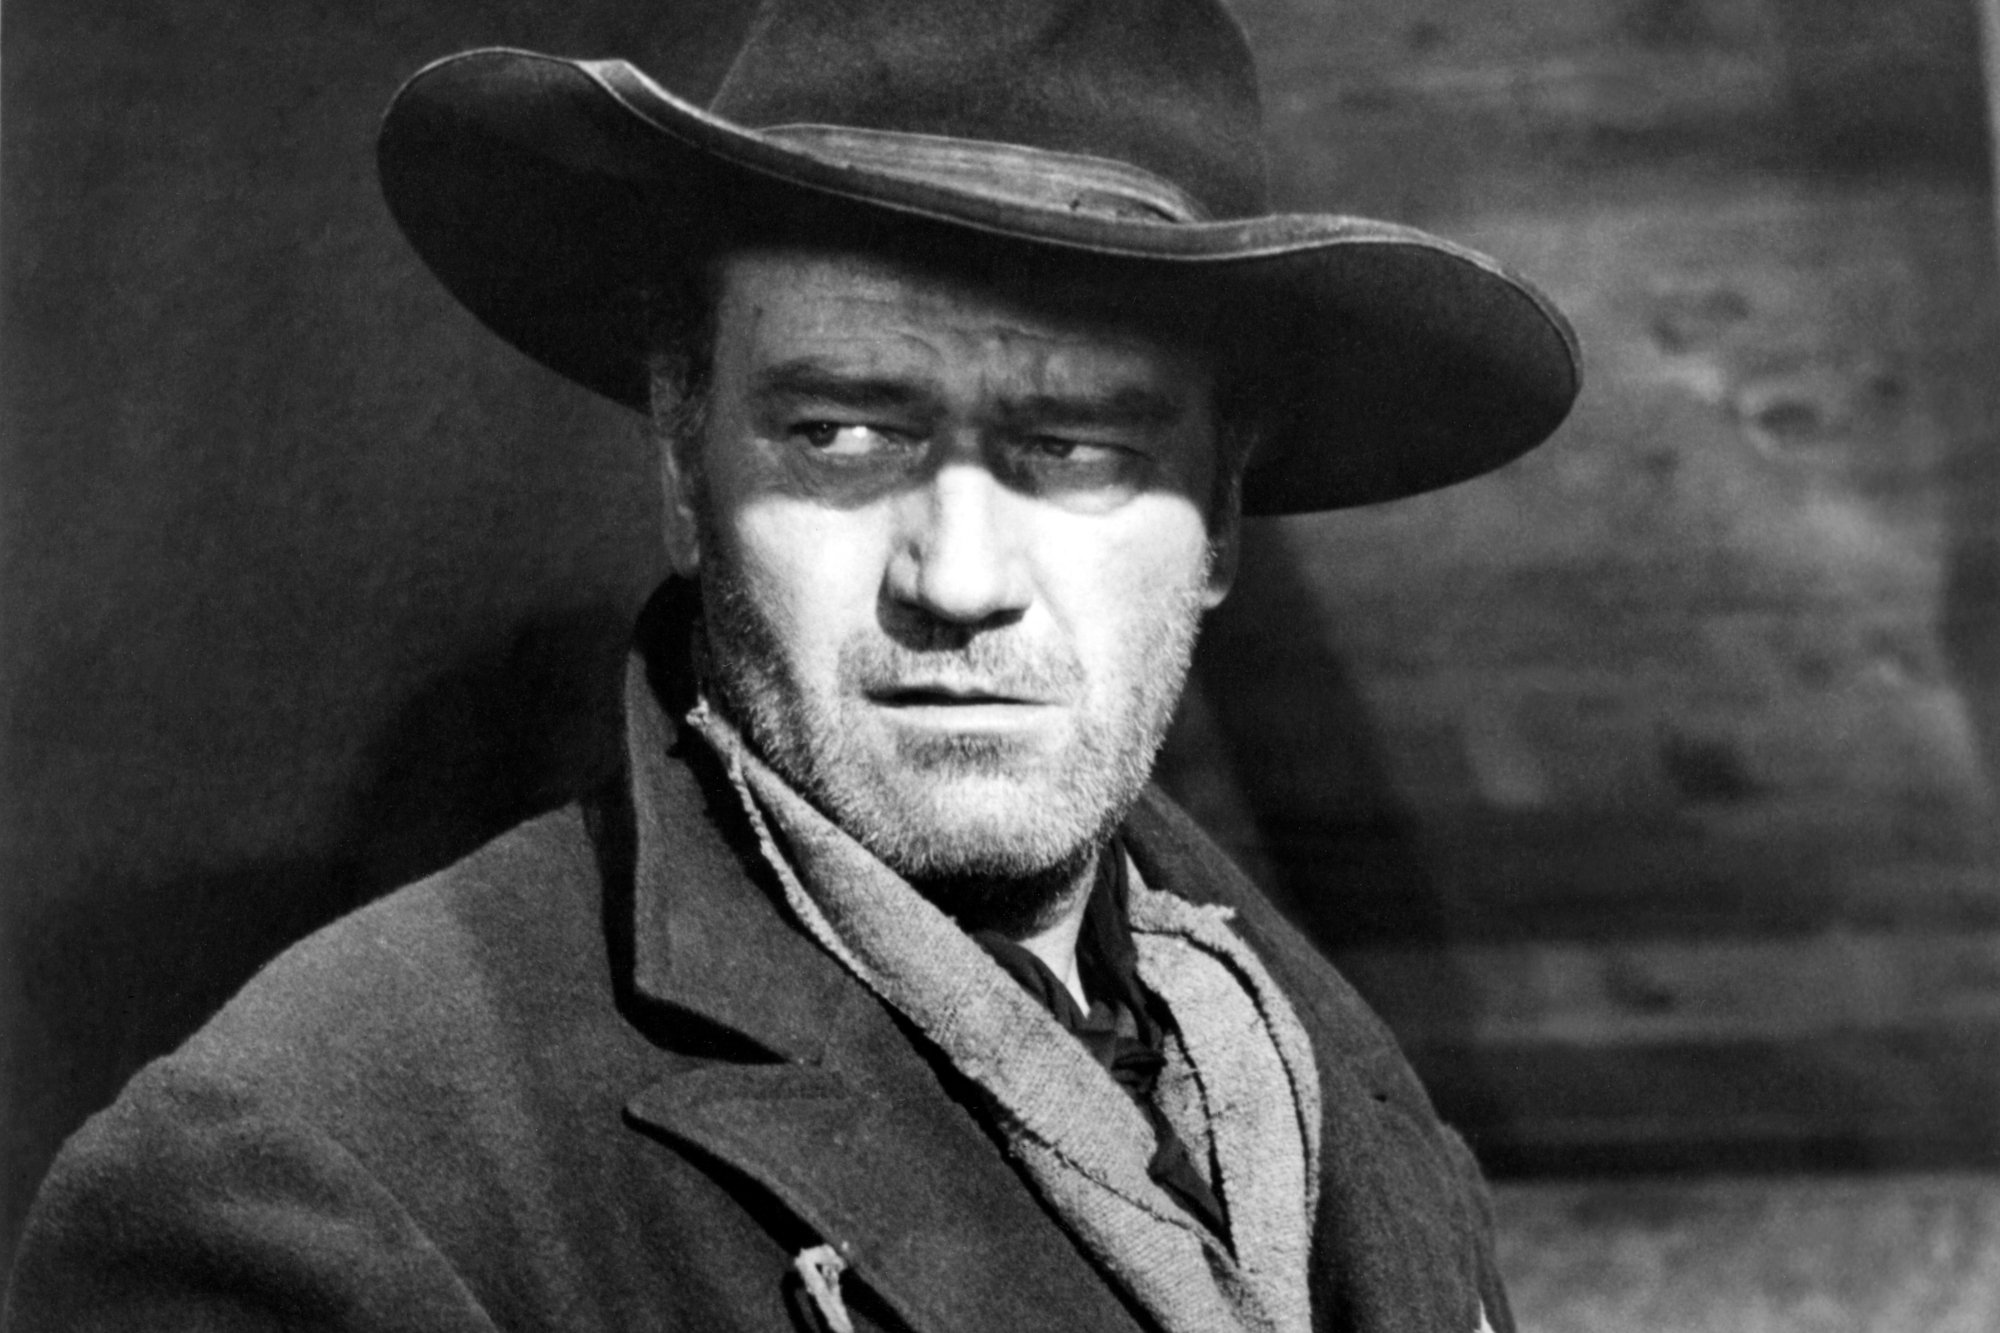 'The Searchers' John Wayne as Ethan Edwards in a black-and-white picture looking off to the side while wearing a cowboy costume